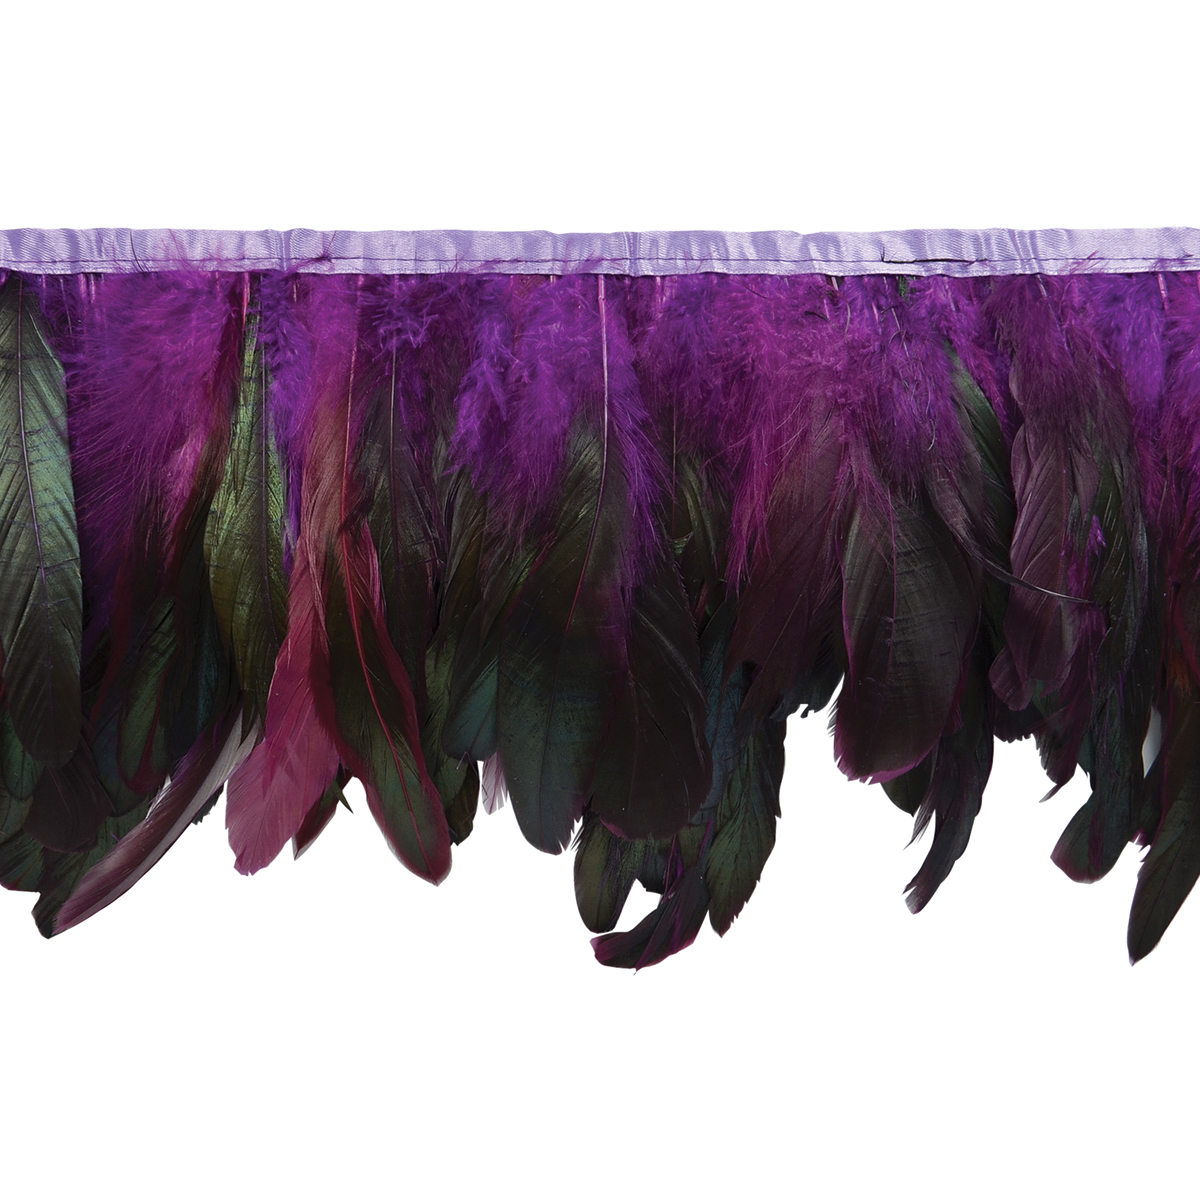 Expo Int'L Fionna Feather Fringe Trim By The Yard - image 2 of 2